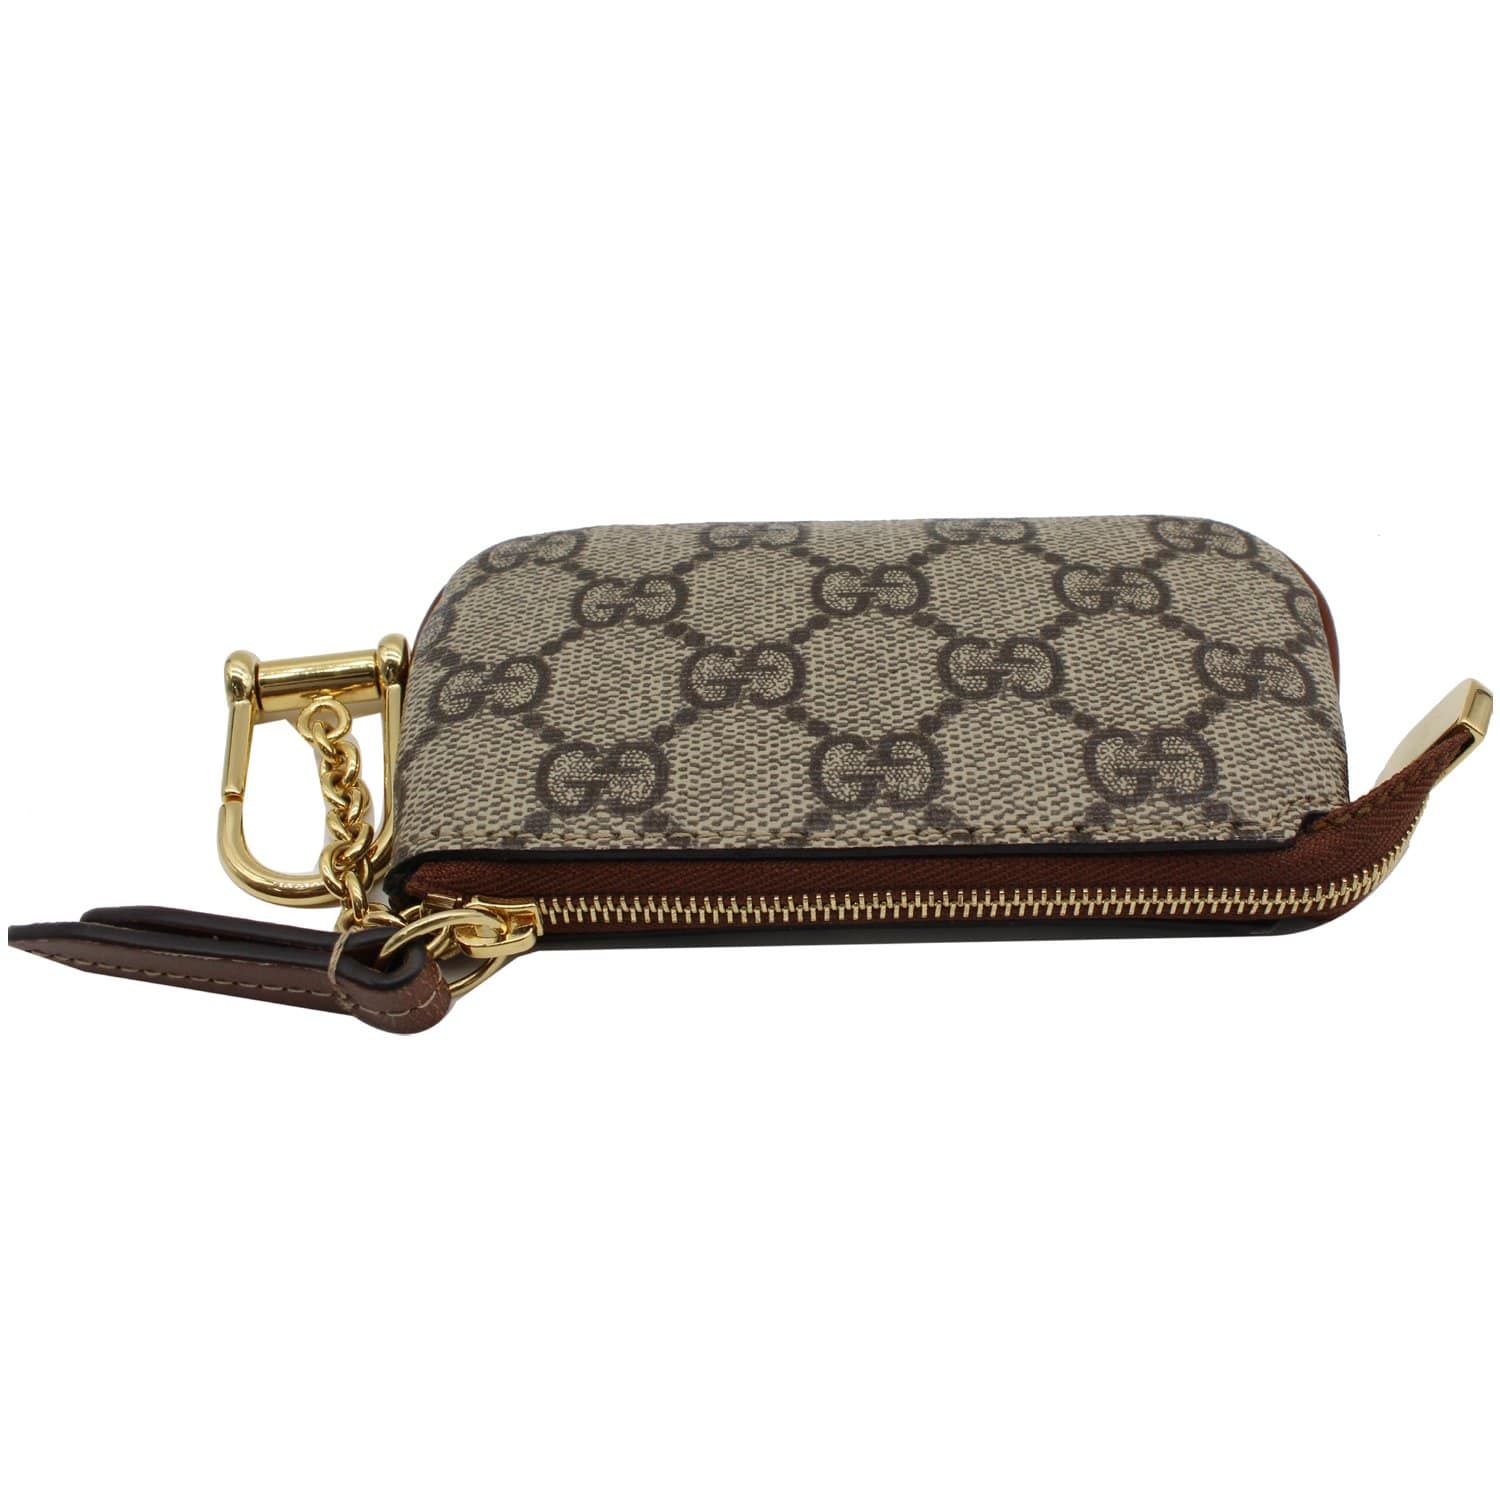 GUCCI Signature 447964 Leather Key Case Black from Japan